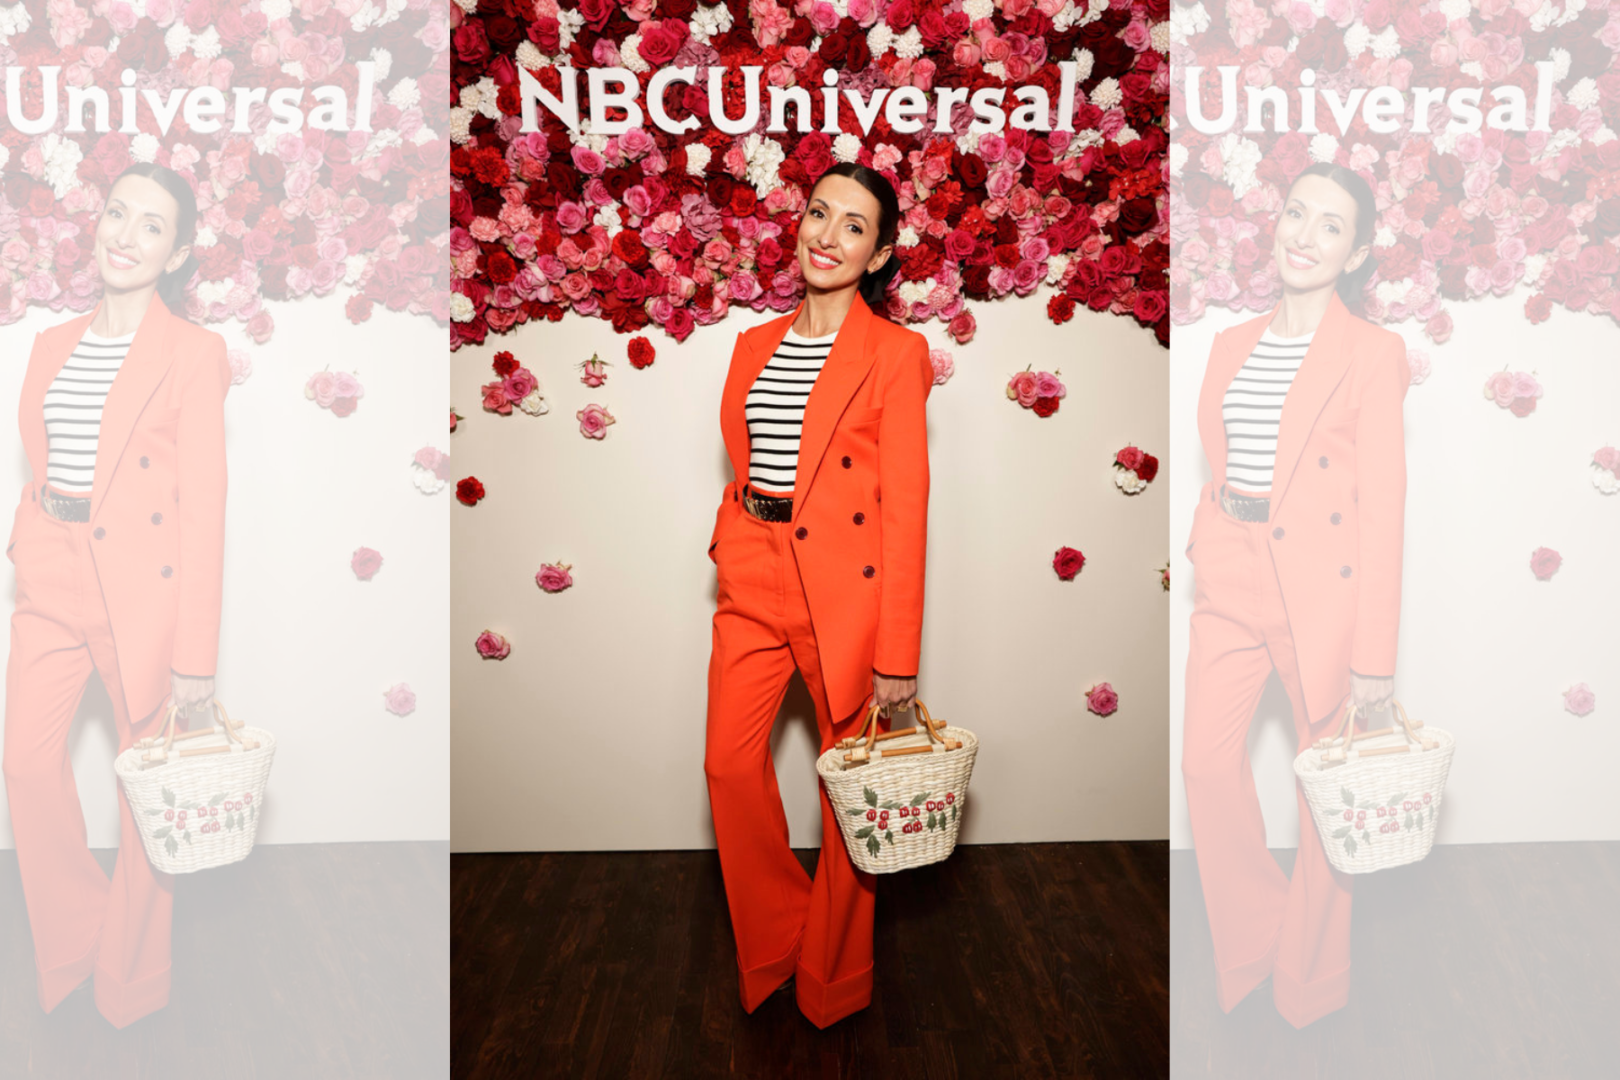 India de Beaufort at the NBCUniversal Winter Press Tour. Photo by: Todd Williamson/NBCUniversal.